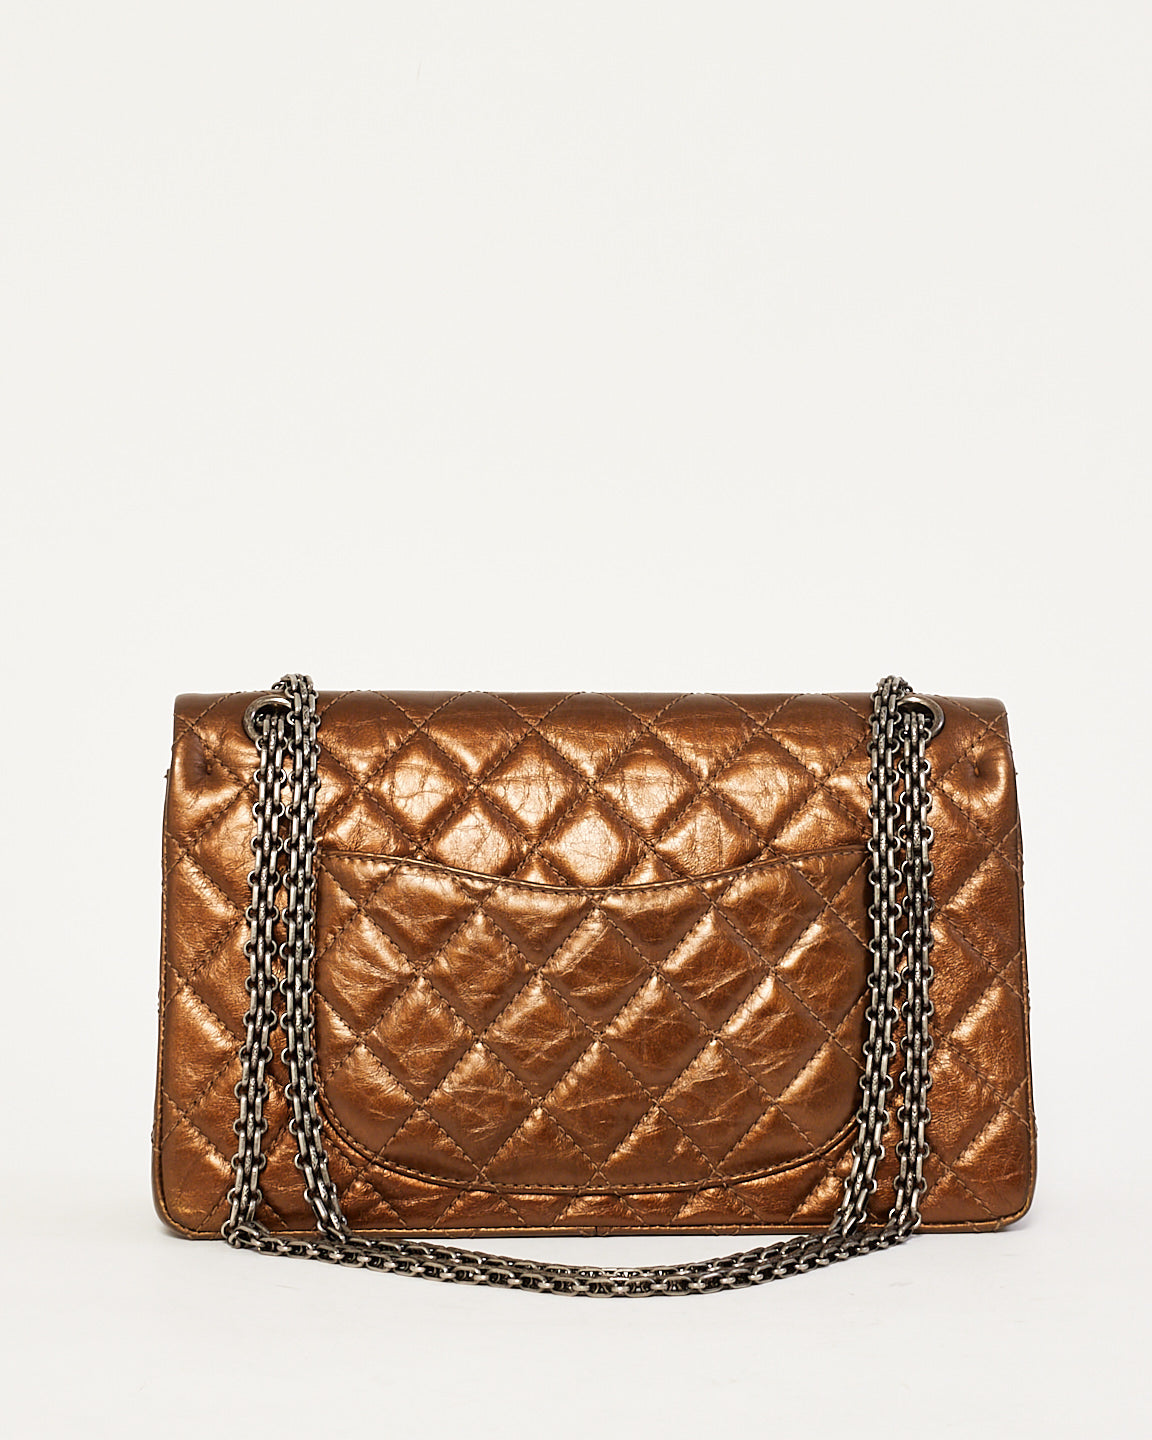 Chanel Bronze Aged Leather 226 Reissue Double Flap Bag